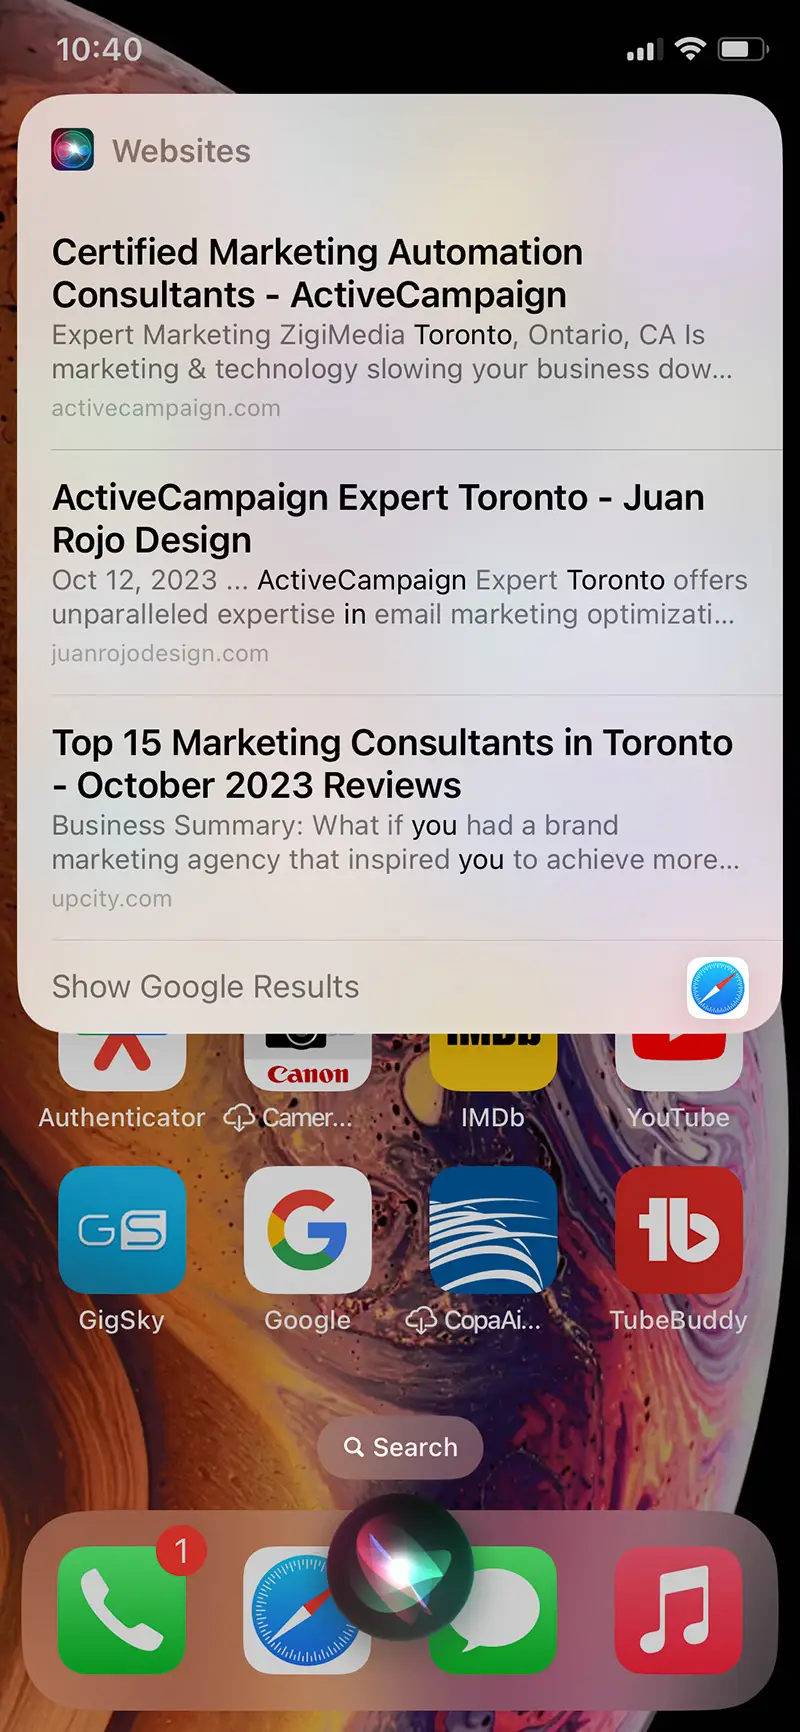 Voice Search Optimization | Screen shot of iPhone screen displaying search results after prompting Siri to find ActiveCampaign Experts in Toronto - Juan Rojo Design Toronto